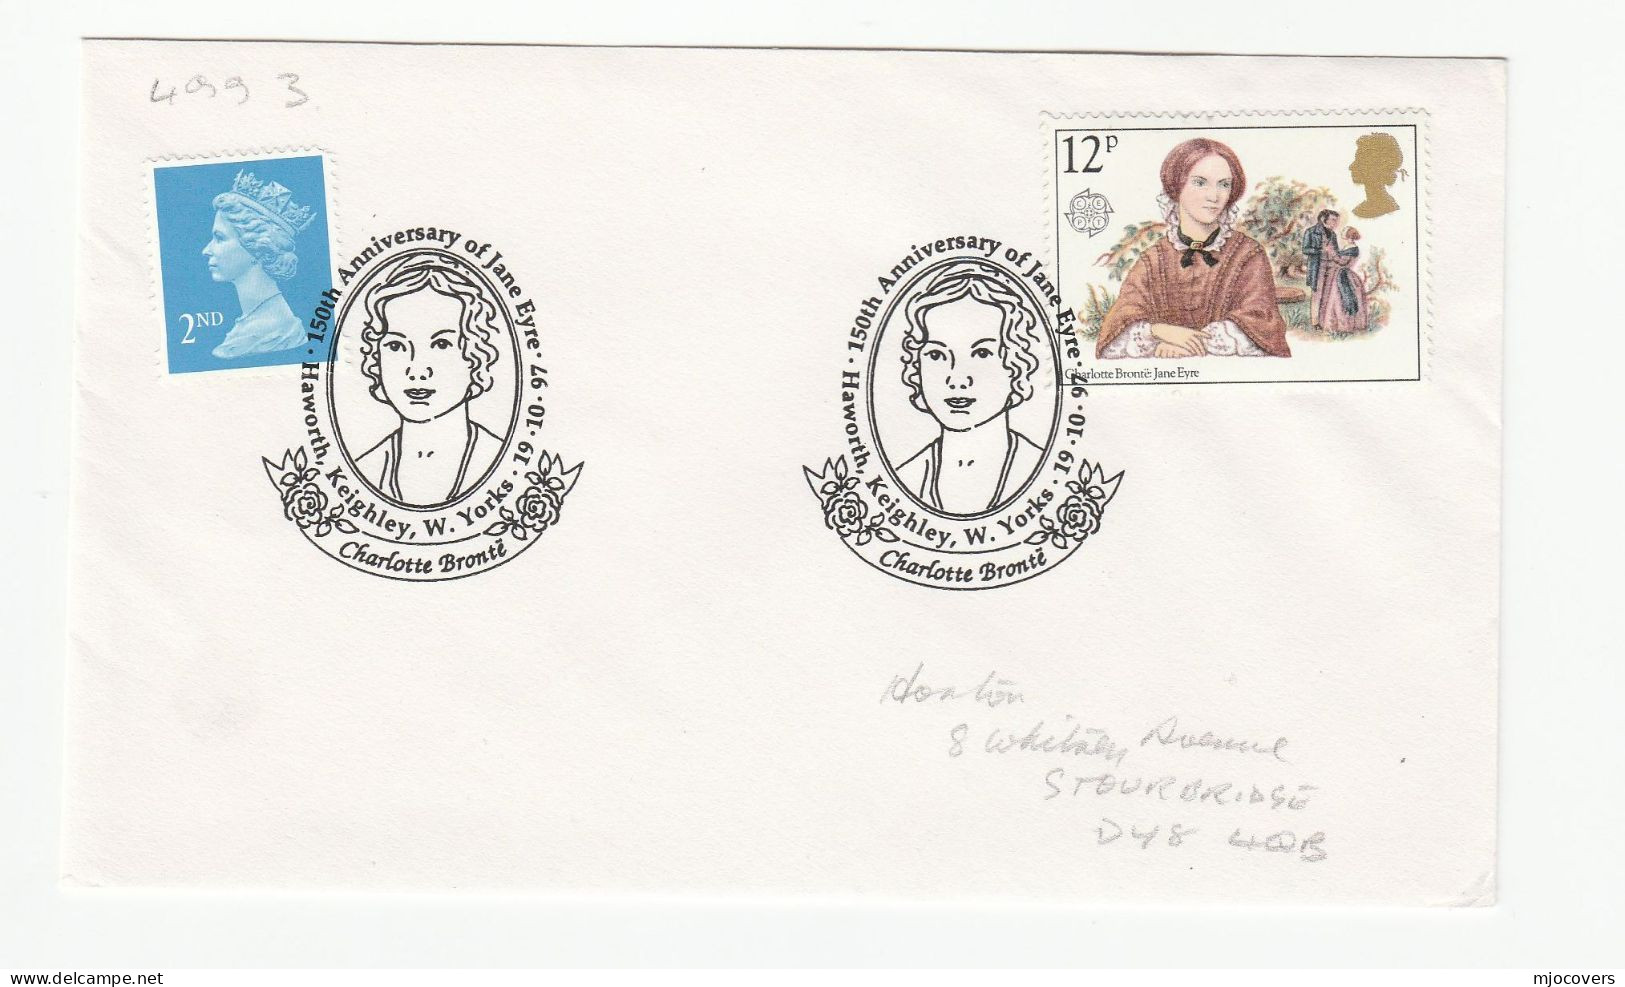 Cover JANE EYRE Novel  150th Anniv Haworth Keighley GB Charlotte BRONTE Fdc  Stamps Literature Rose Flower Roses 1997 - Femmes Célèbres